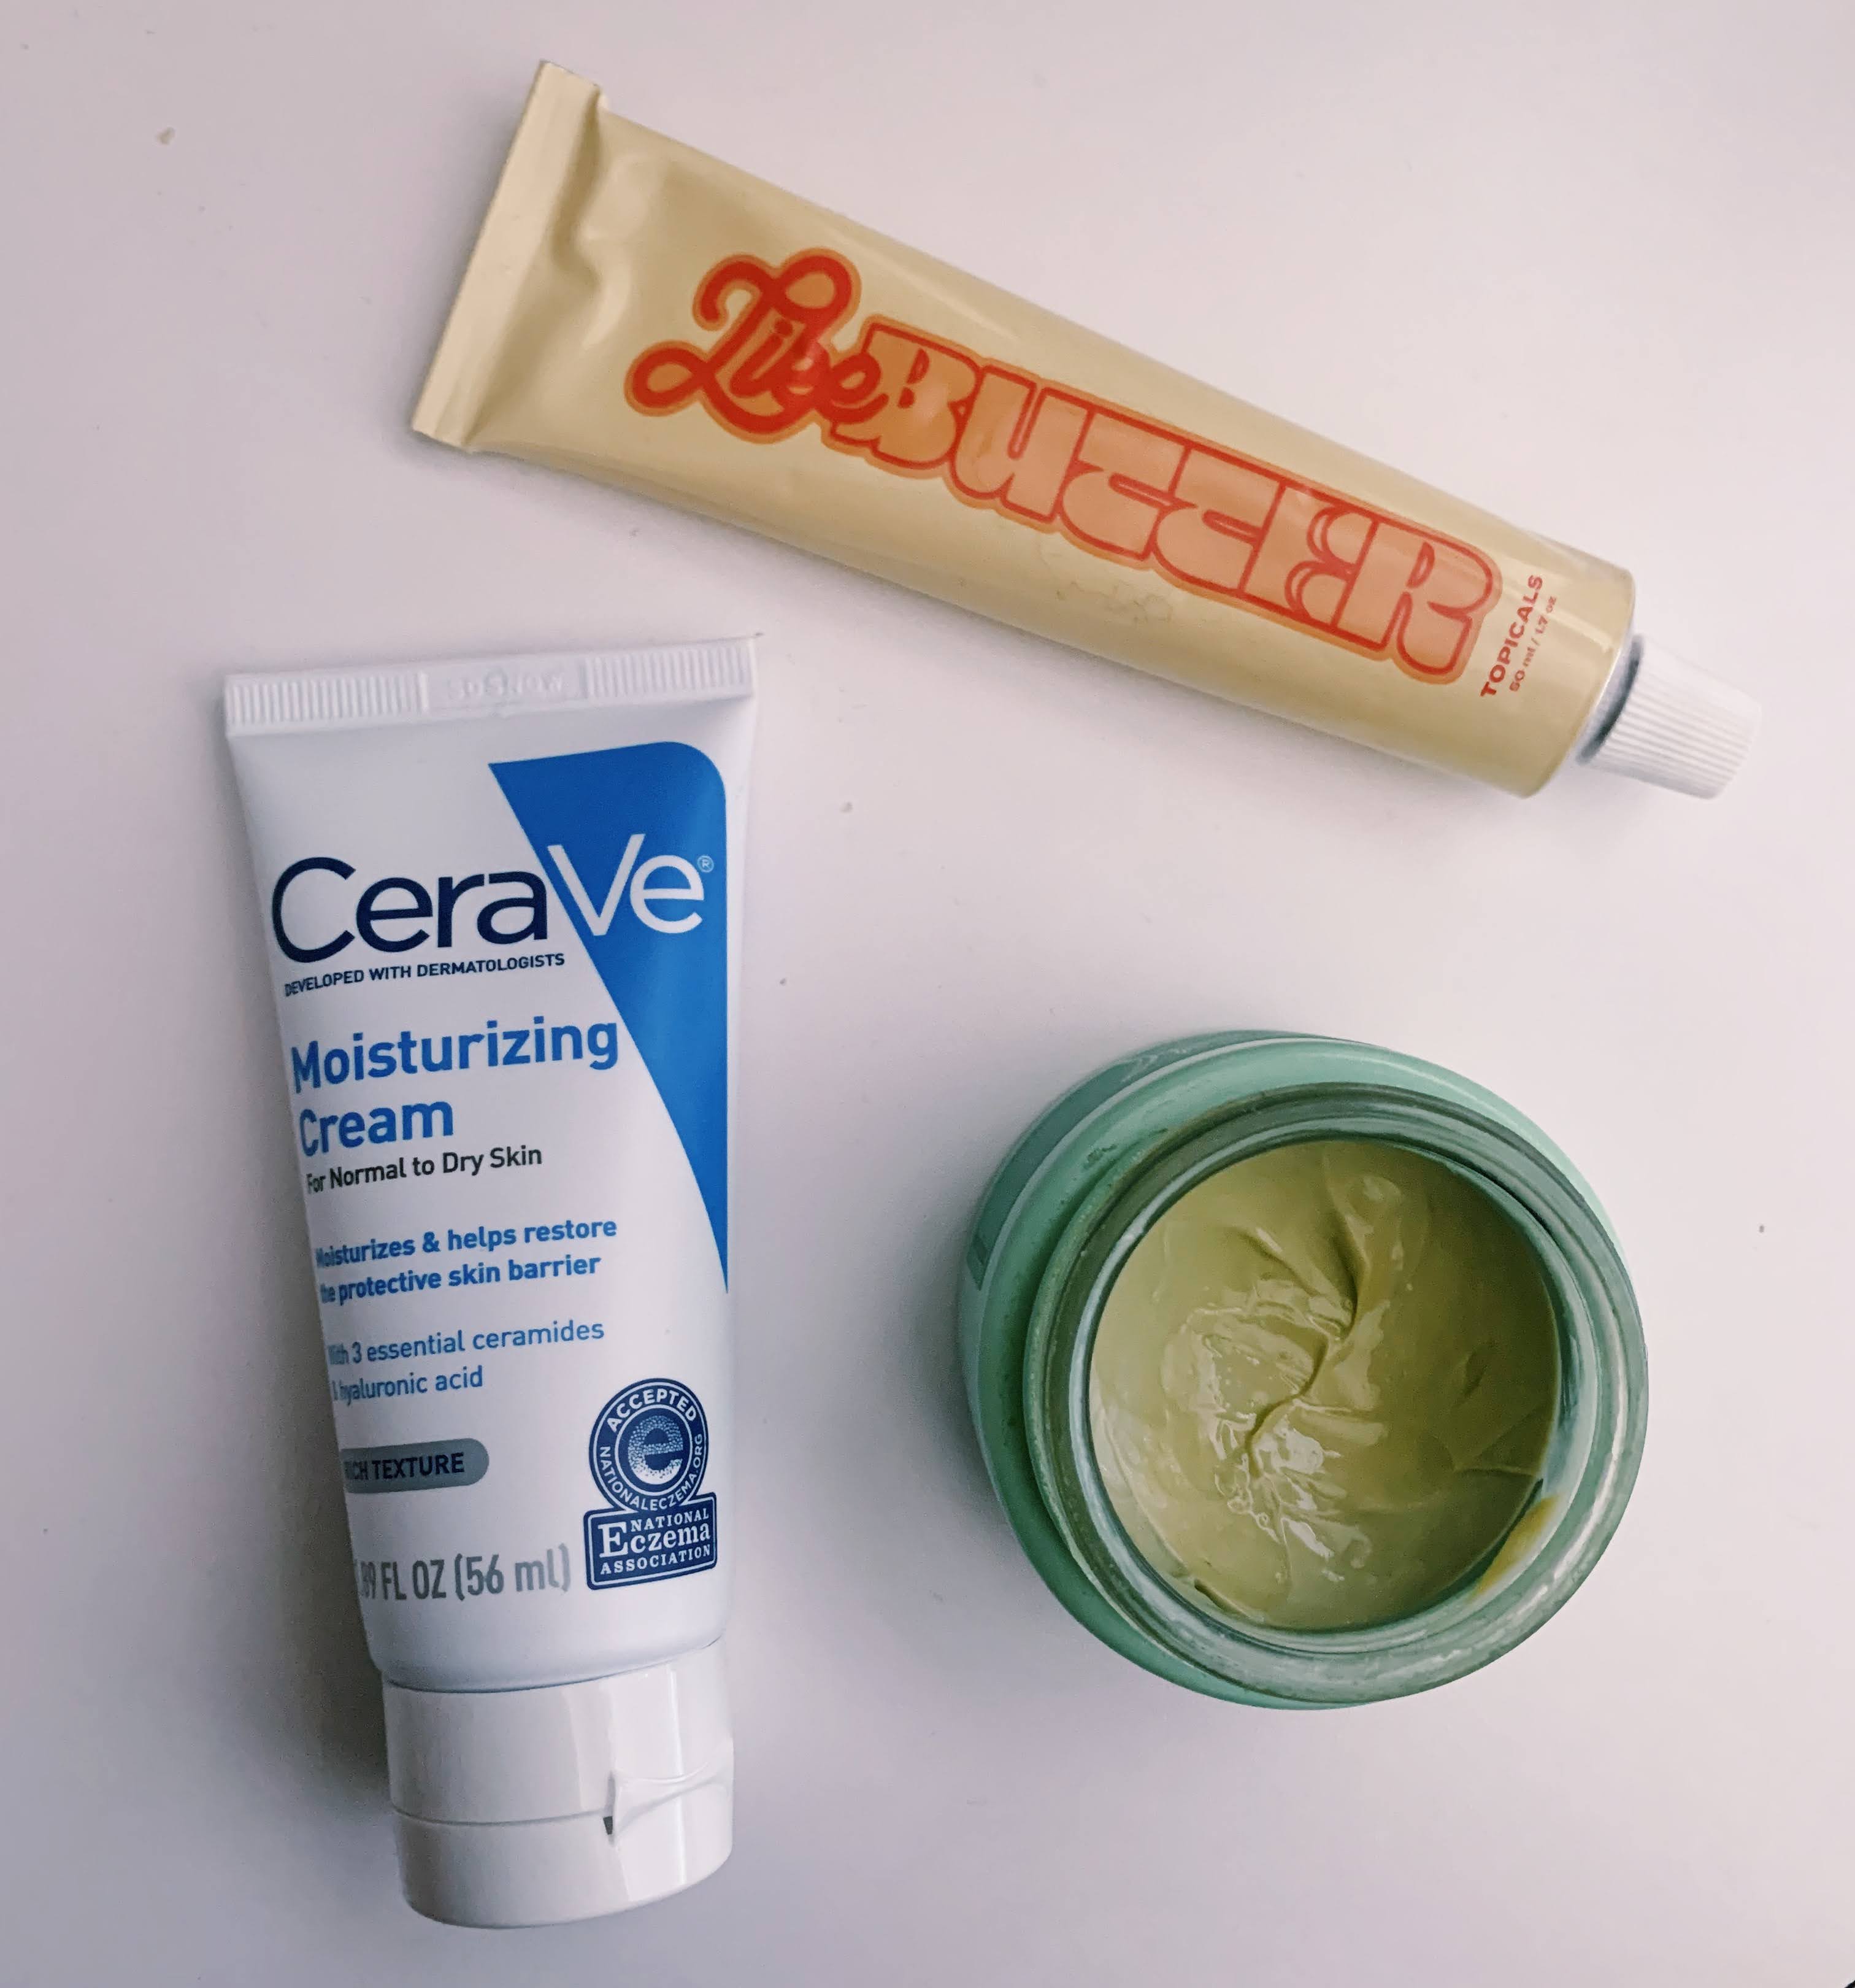 Photo of the CeraVe Moisturizing Cream, Topicals Like Butter, and Cocokind Matcha Moisturizer